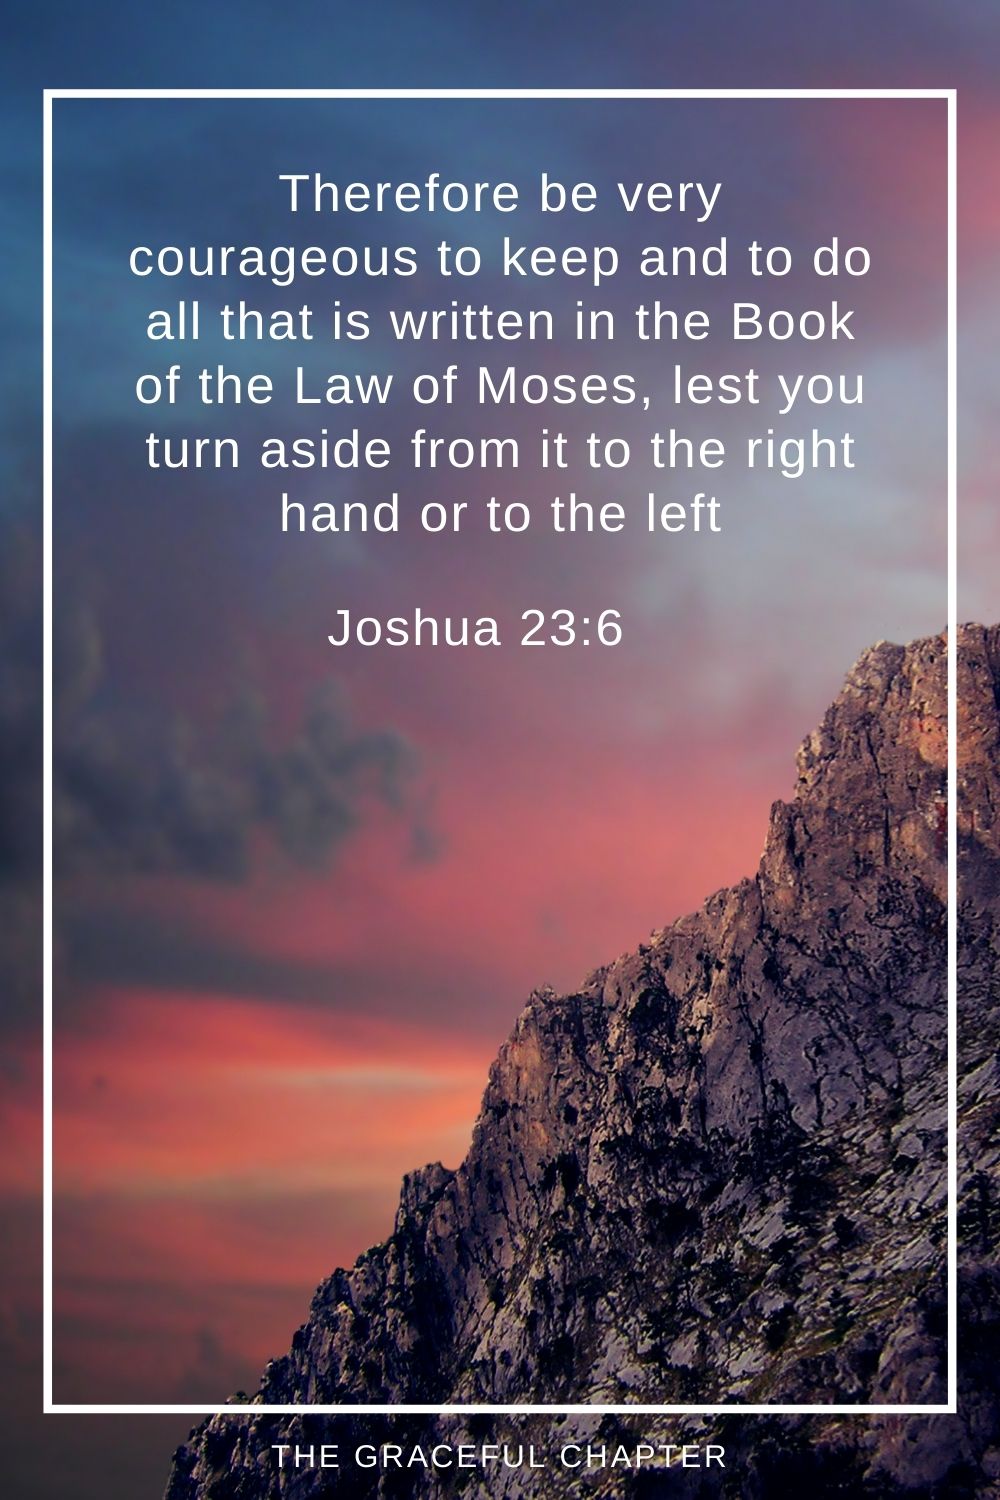 Therefore be very courageous to keep and to do all that is written in the Book of the Law of Moses, lest you turn aside from it to the right hand or to the left Joshua 23:6